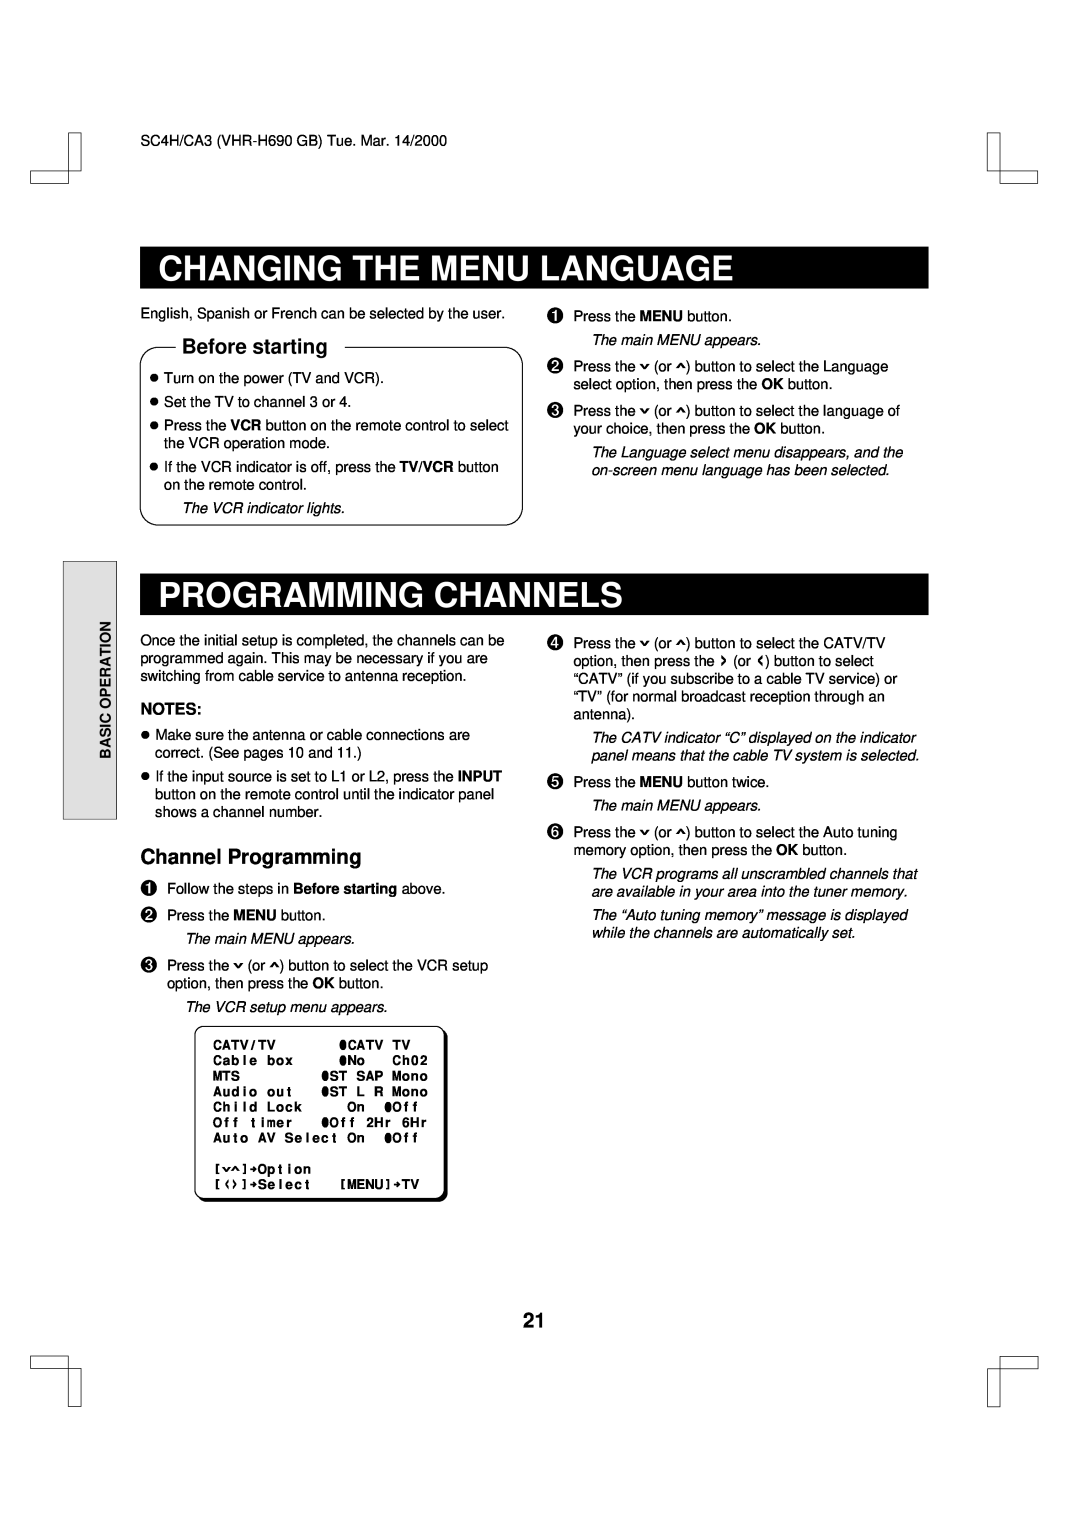 Sanyo VHR-H690 Changing The Menu Language, Programming Channels, Channel Programming, Before starting, Basic Operation 